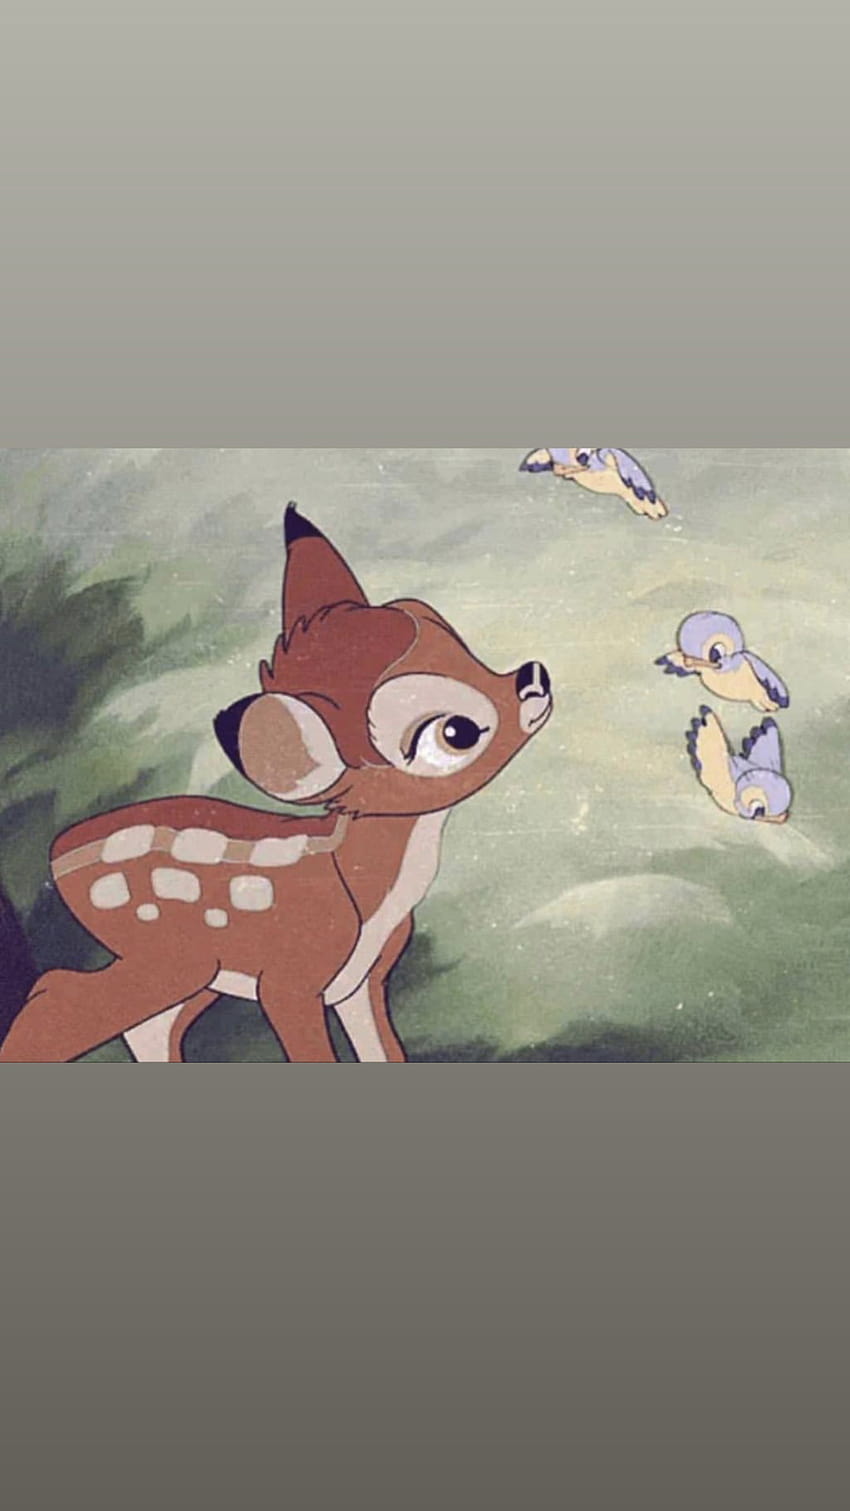 Buy Bambi Wall Mural A Life in the Woods Wallpaper Nursery Online in India   Etsy